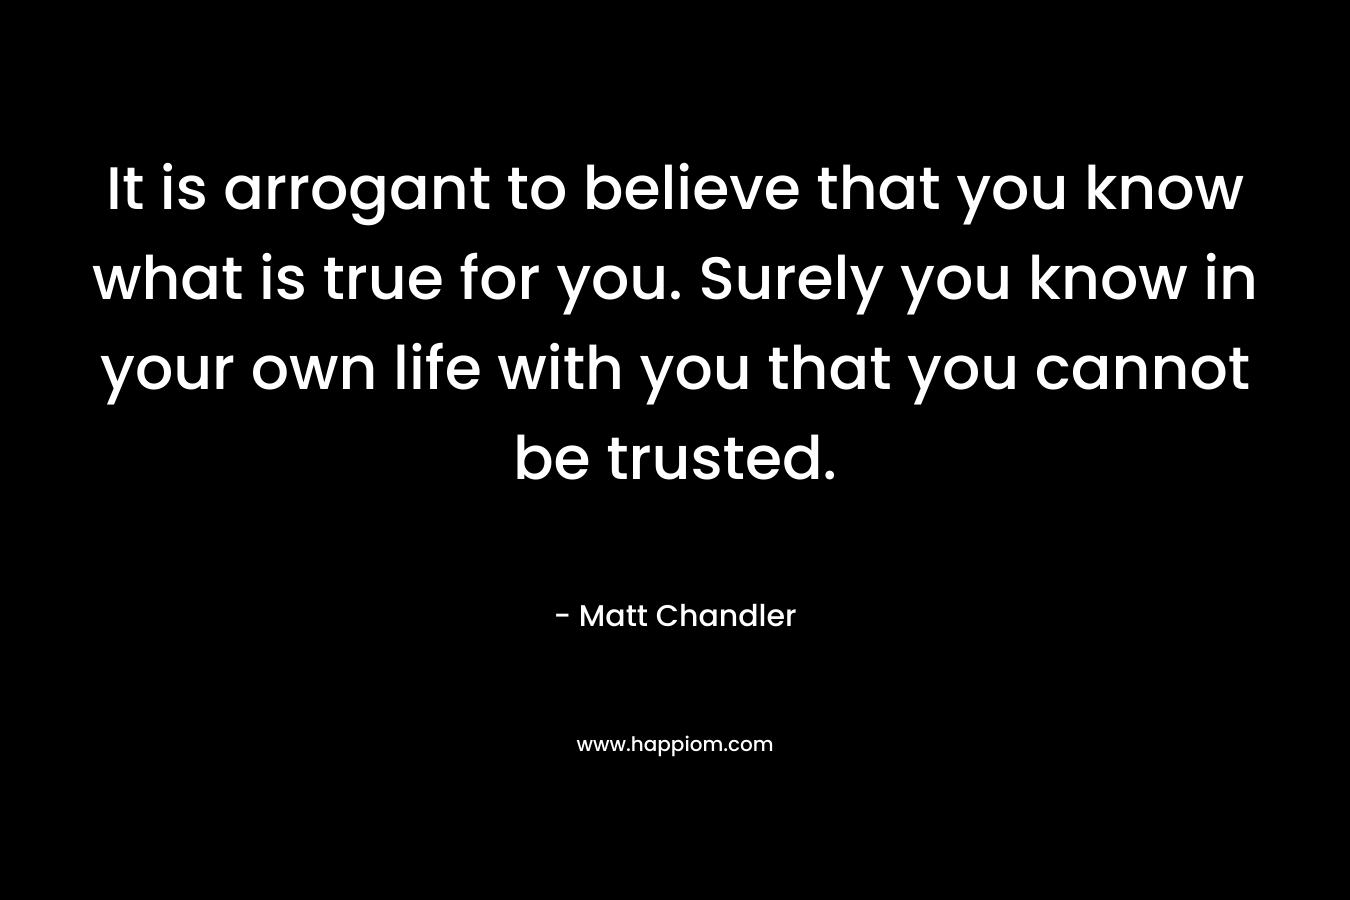 It is arrogant to believe that you know what is true for you. Surely you know in your own life with you that you cannot be trusted.